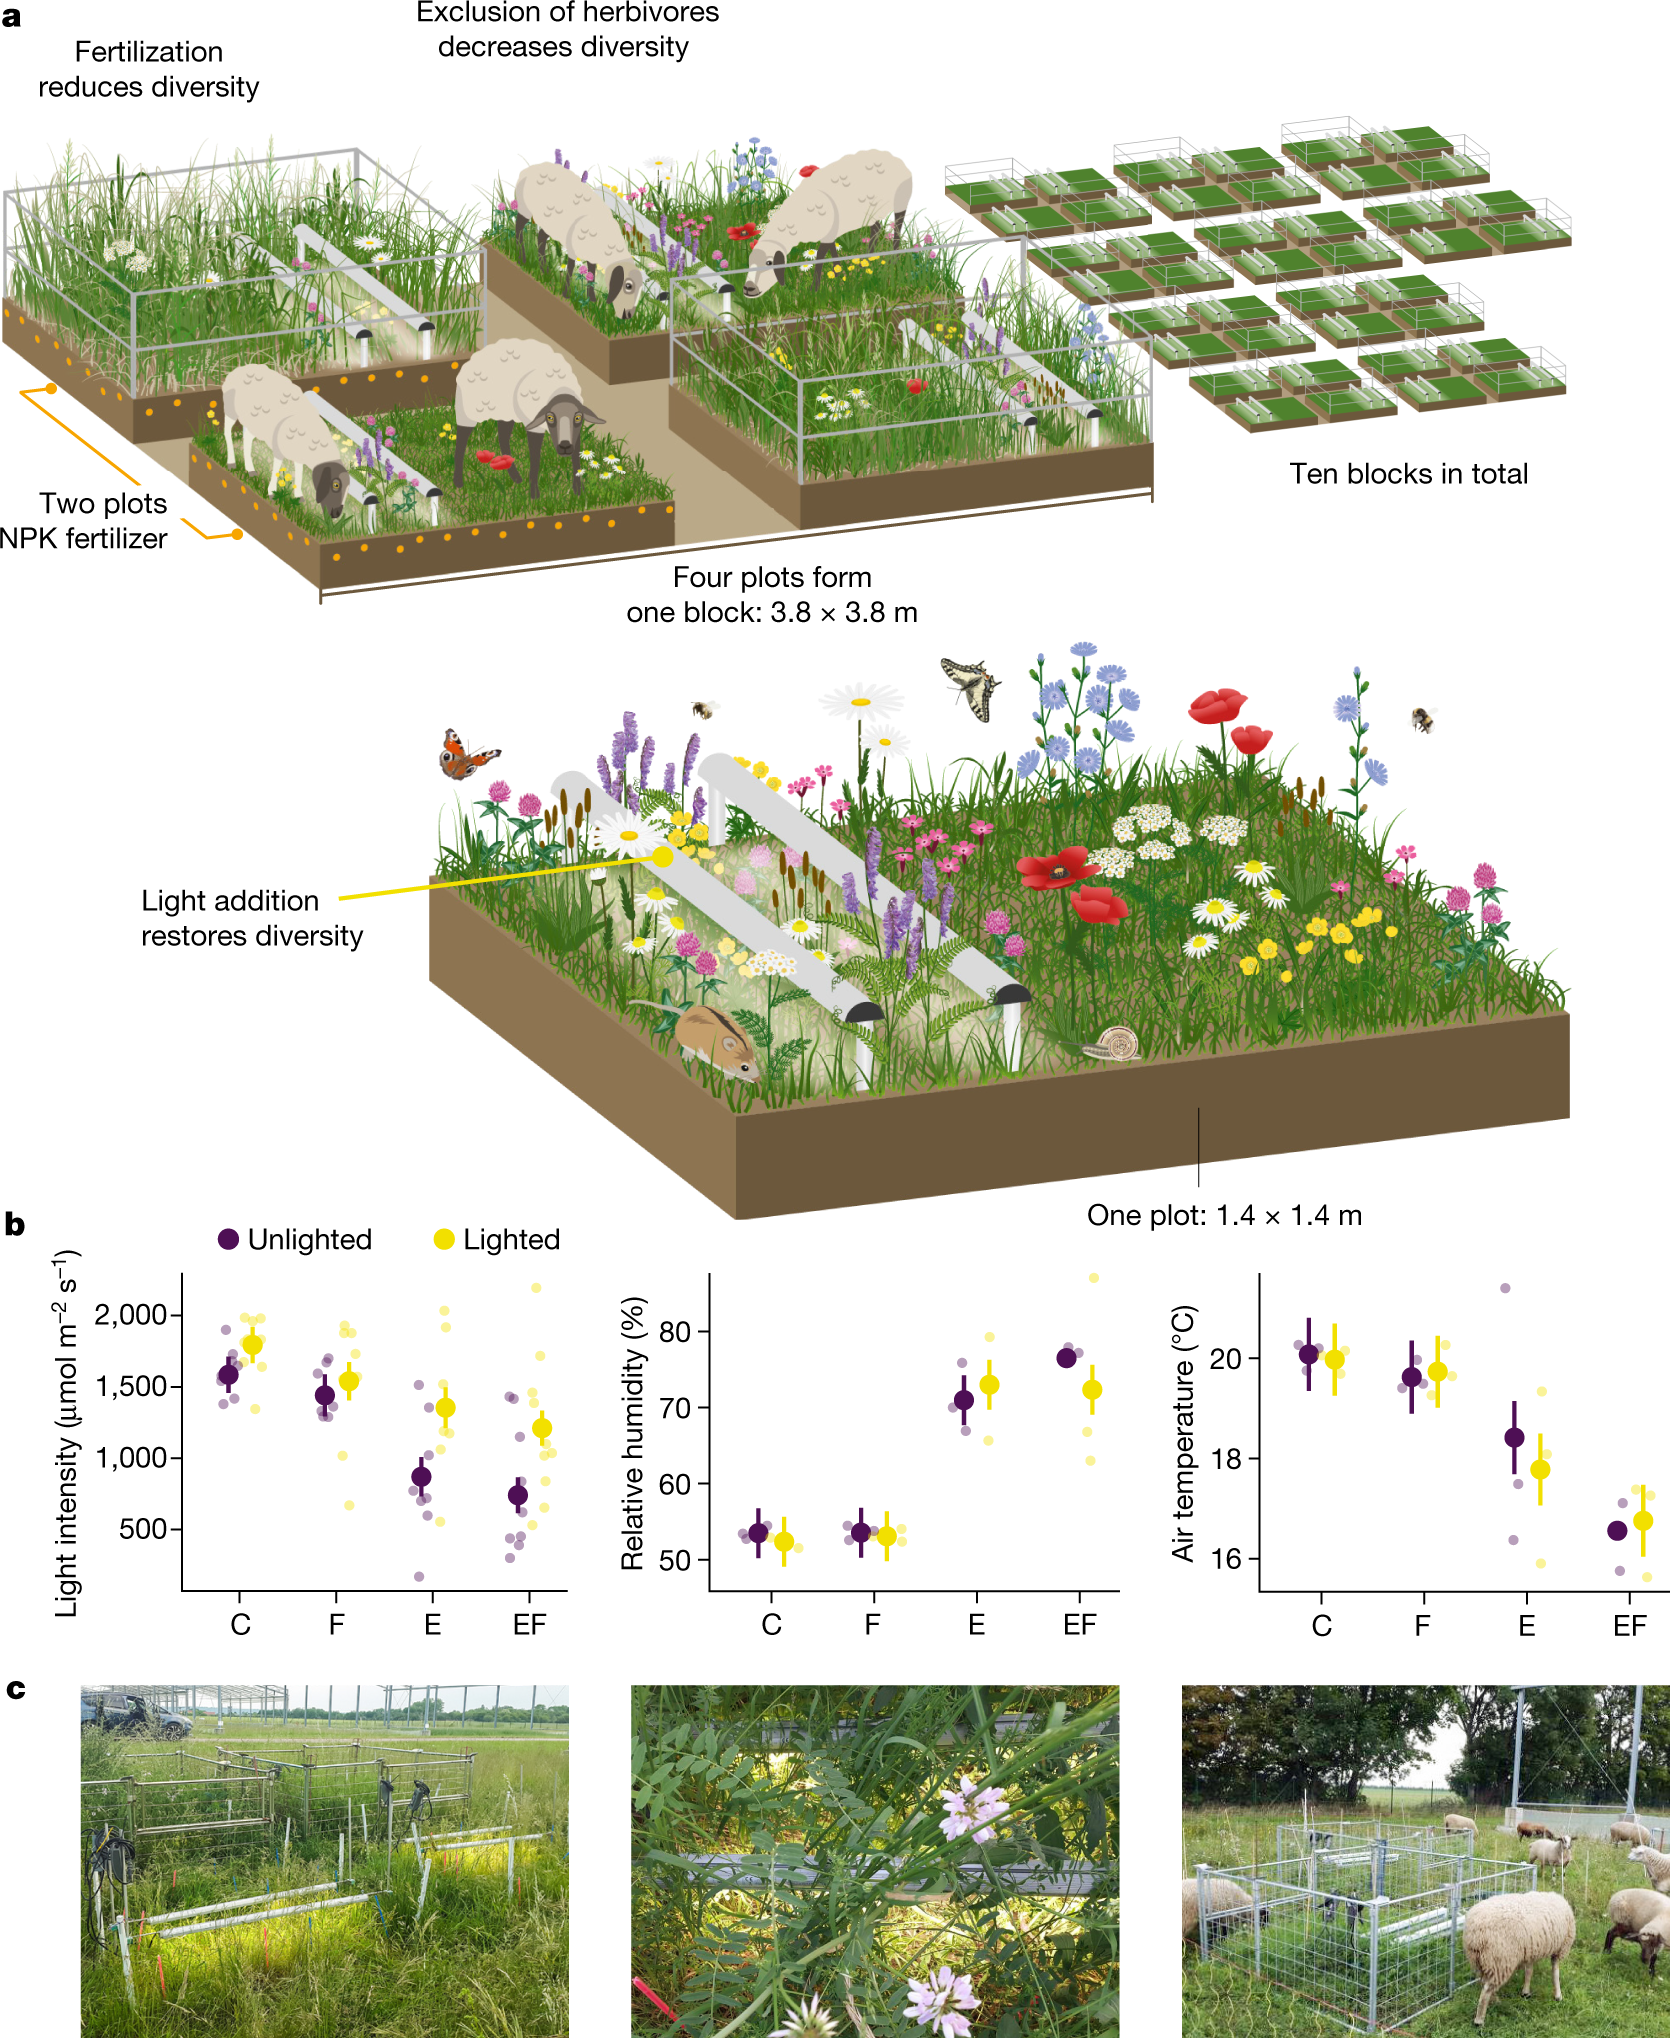 Light competition drives herbivore and nutrient effects on plant diversity  | Nature